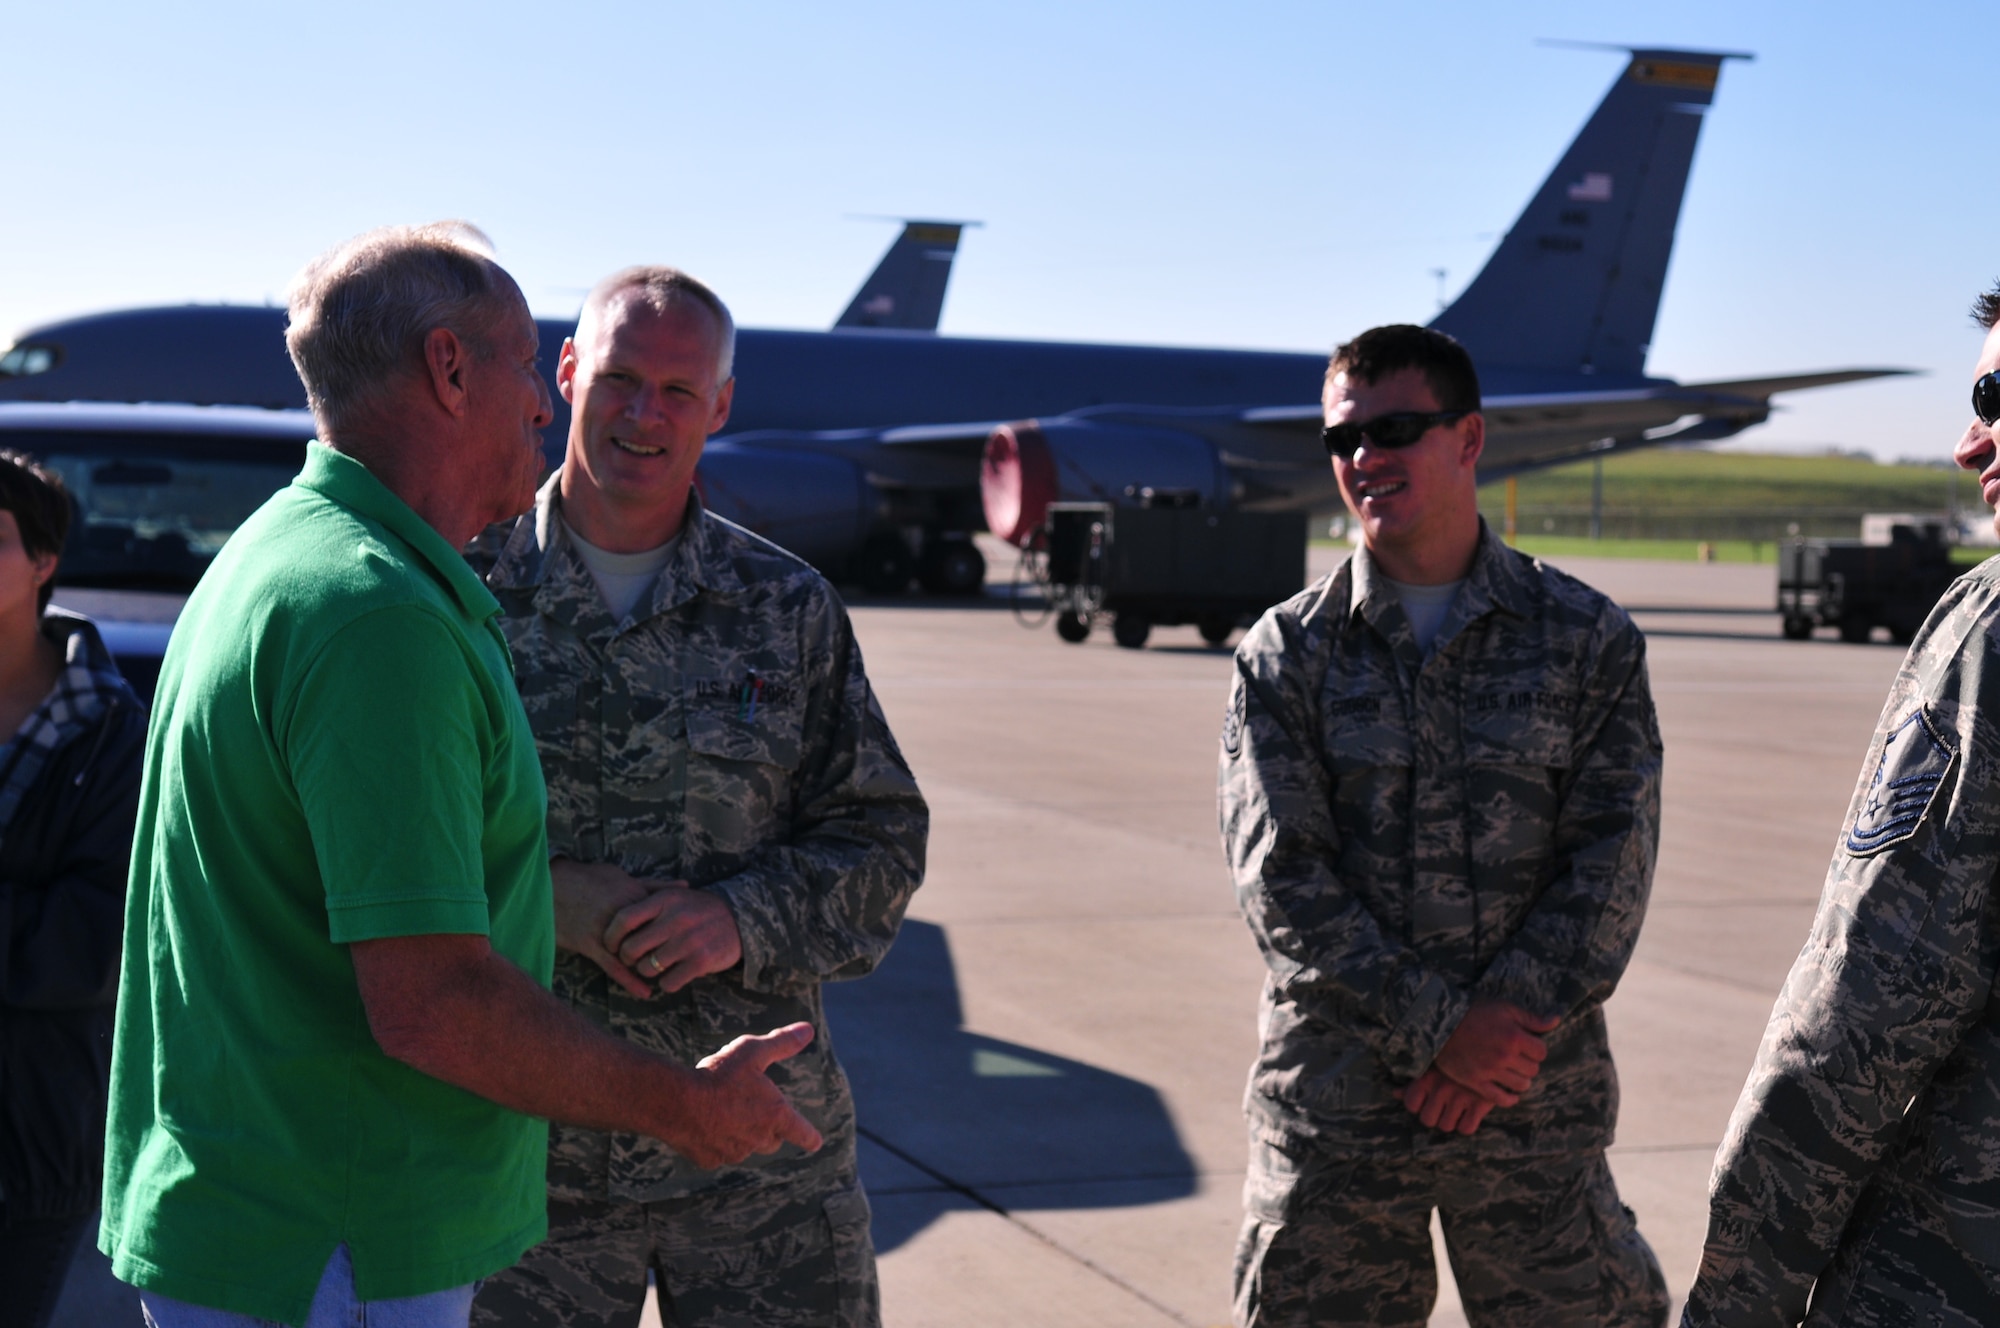 U.S. Air Force Retired Master Sgt. Robert Bragg and Sgt. Tom Lacey are reunited with a KC-135R/T Aircraft September 24, 2013. Bragg and Lacey performed ground maintenance on this particular KC-135R/T as early as 1967 while stationed at Beal AFB, California. The two recalled memories and shared stories with their counterparts from the 171st Air Refueling in Pittsburgh PA.  where the aircraft is still in service today. 44 years have passed since Bragg and Lacey saw each other last. Bragg learned the 171st Air Refueling Wing had the KC-135R/T he once maintained while attending an airshow near Pittsburgh, PA. Bragg posted a story on a KC-135Q website where Lacey found it. Lacey shorty contacted the 171st Public Affairs office and requested if the two could visit the base. (U.S. Air National Guard photo by Tech. Sgt. Shawn Monk/Released)   